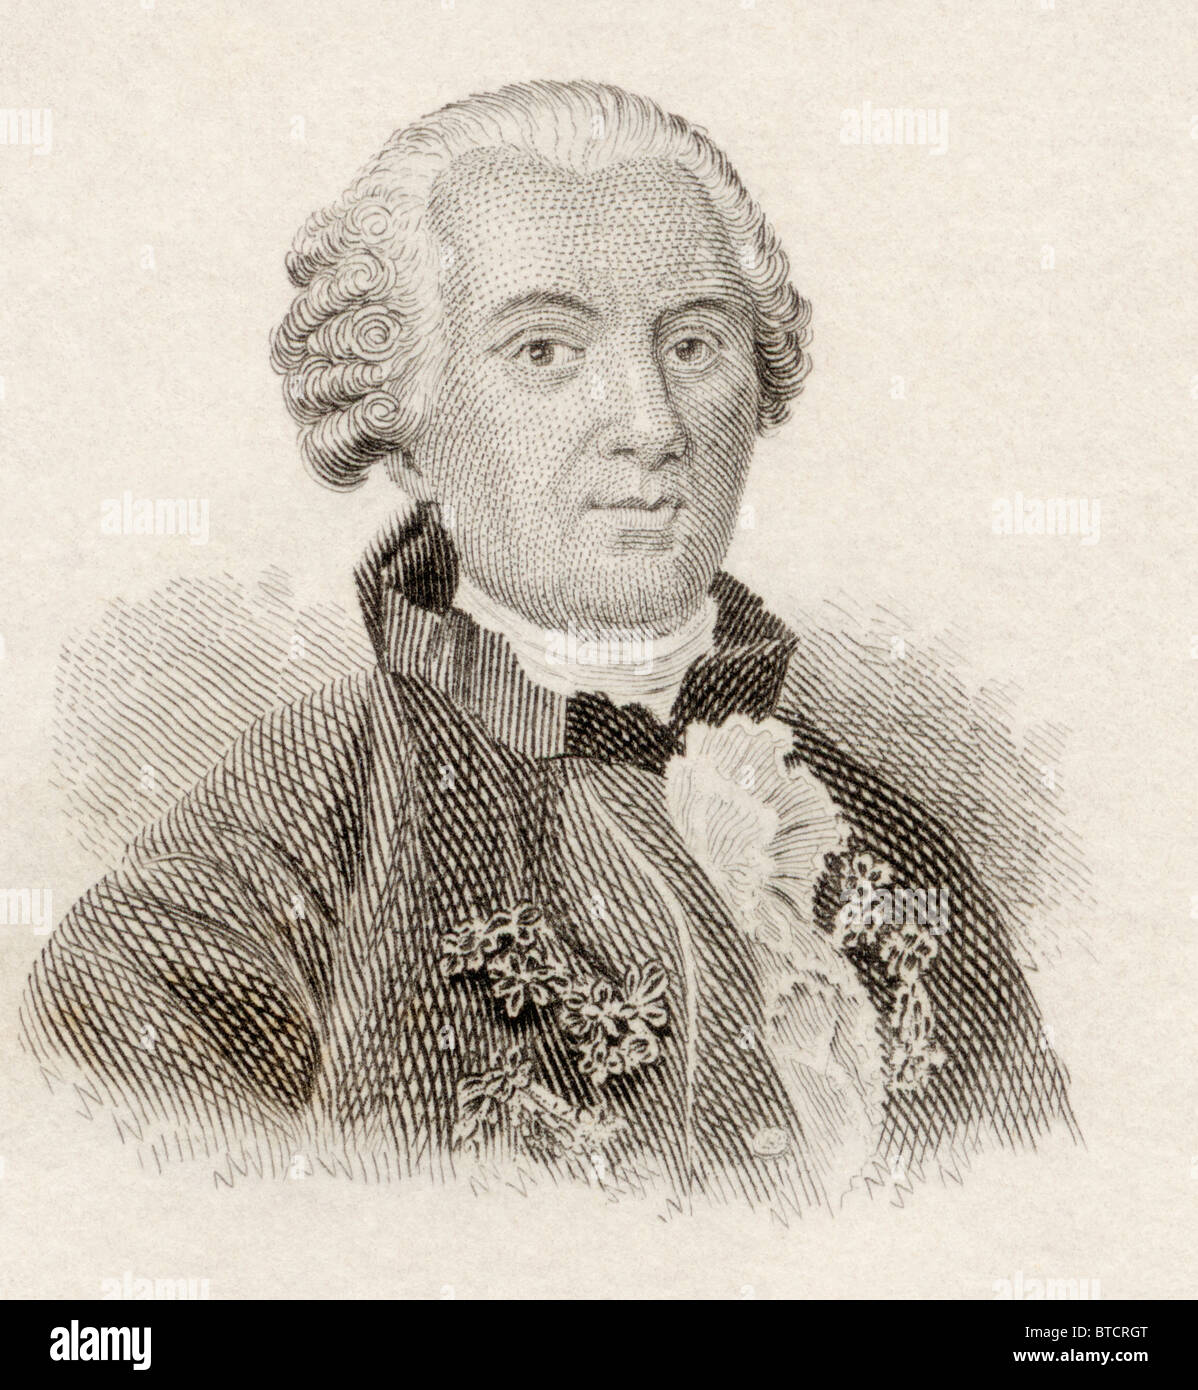 Georges-Louis Leclerc, Comte de Buffon, 1707 to 1788. French naturalist, mathematician, cosmologist, and encyclopedic author. Stock Photo